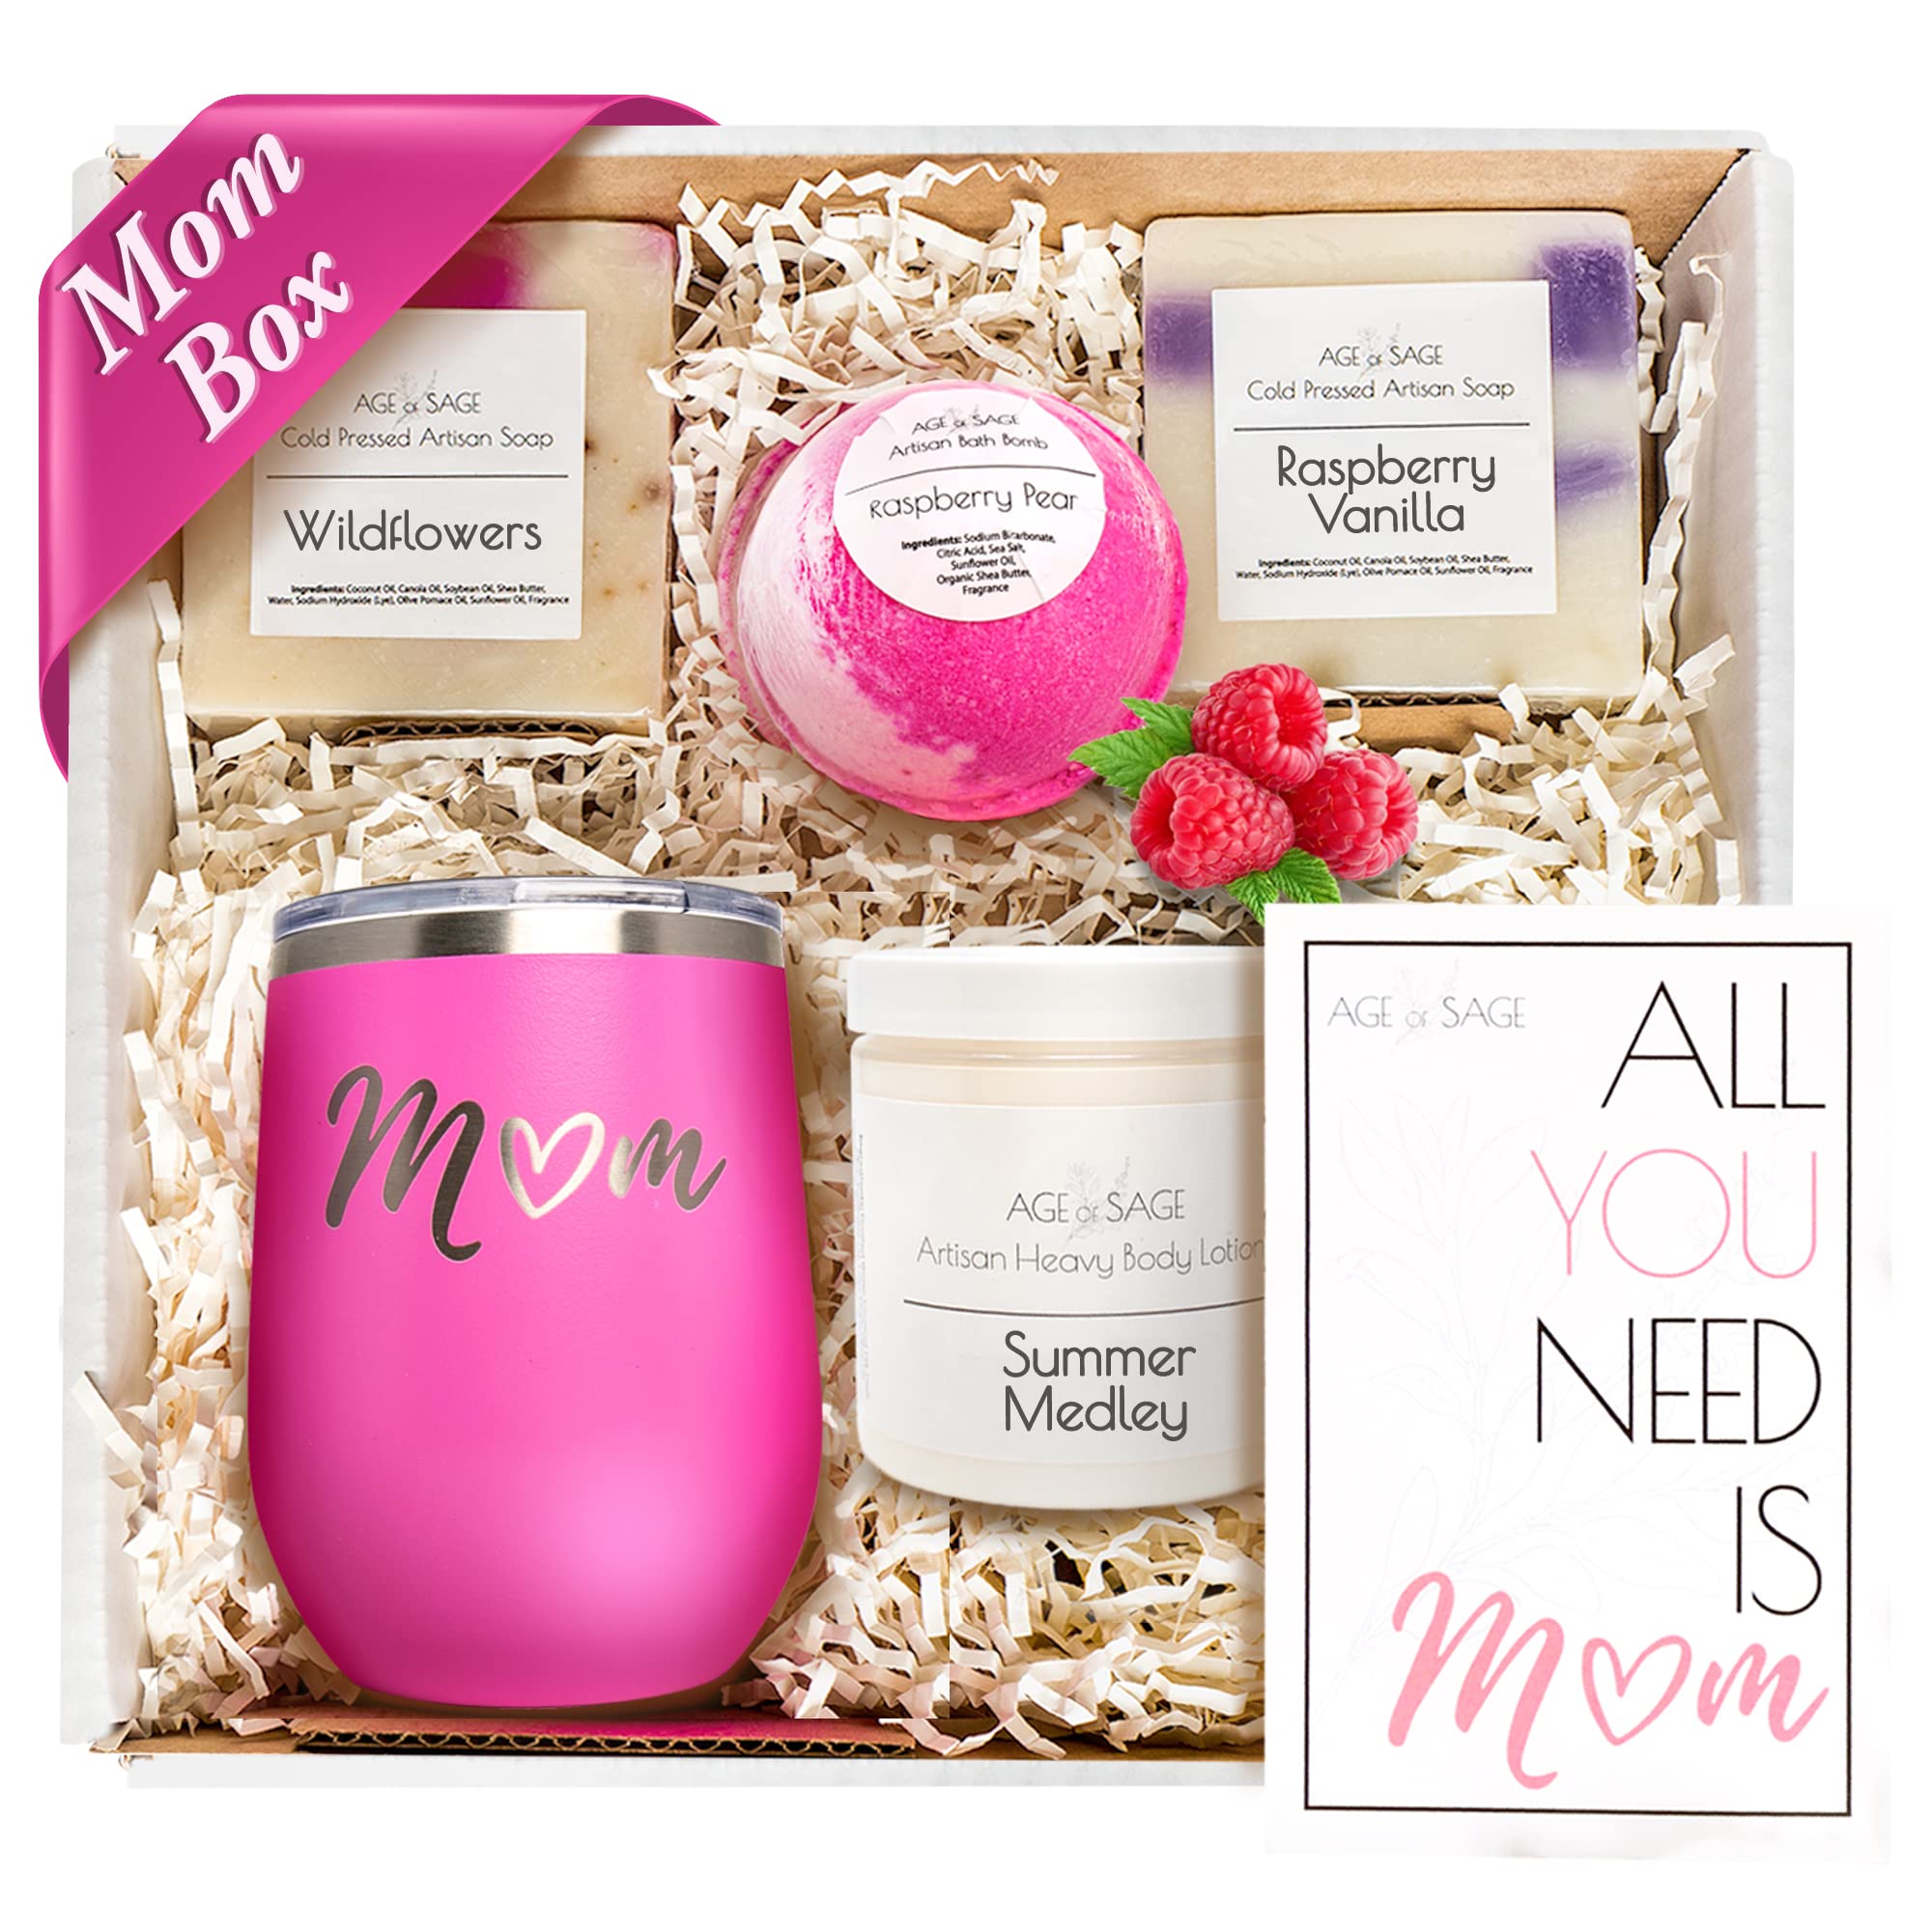 Birthday Gifts for Women Best Relaxing Spa Gifts Baskets Box for Her Wife  Mom Best Friend Mother Grandma Bday Bath and Body Kit Sets Self Care  Present